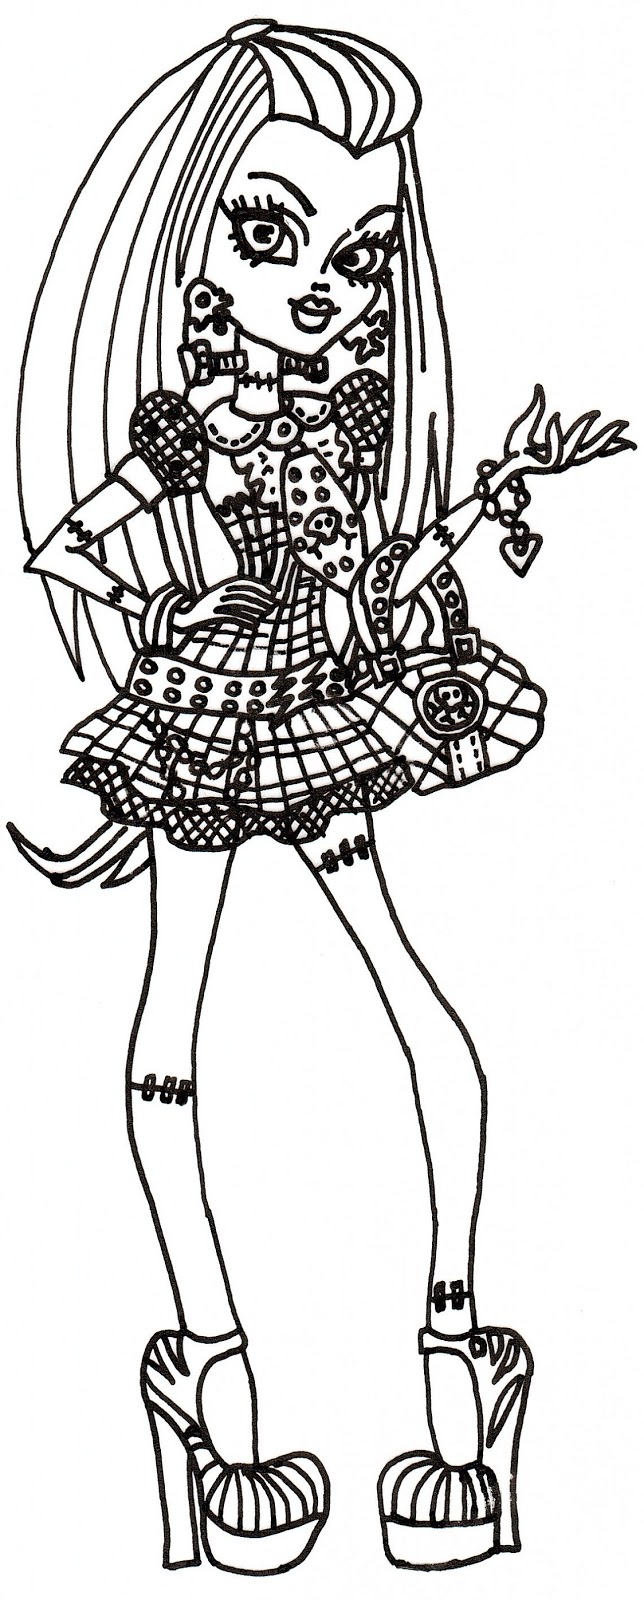 Download Free Printable Monster High Coloring Pages: Free Frankie Stein Coloring Sheet